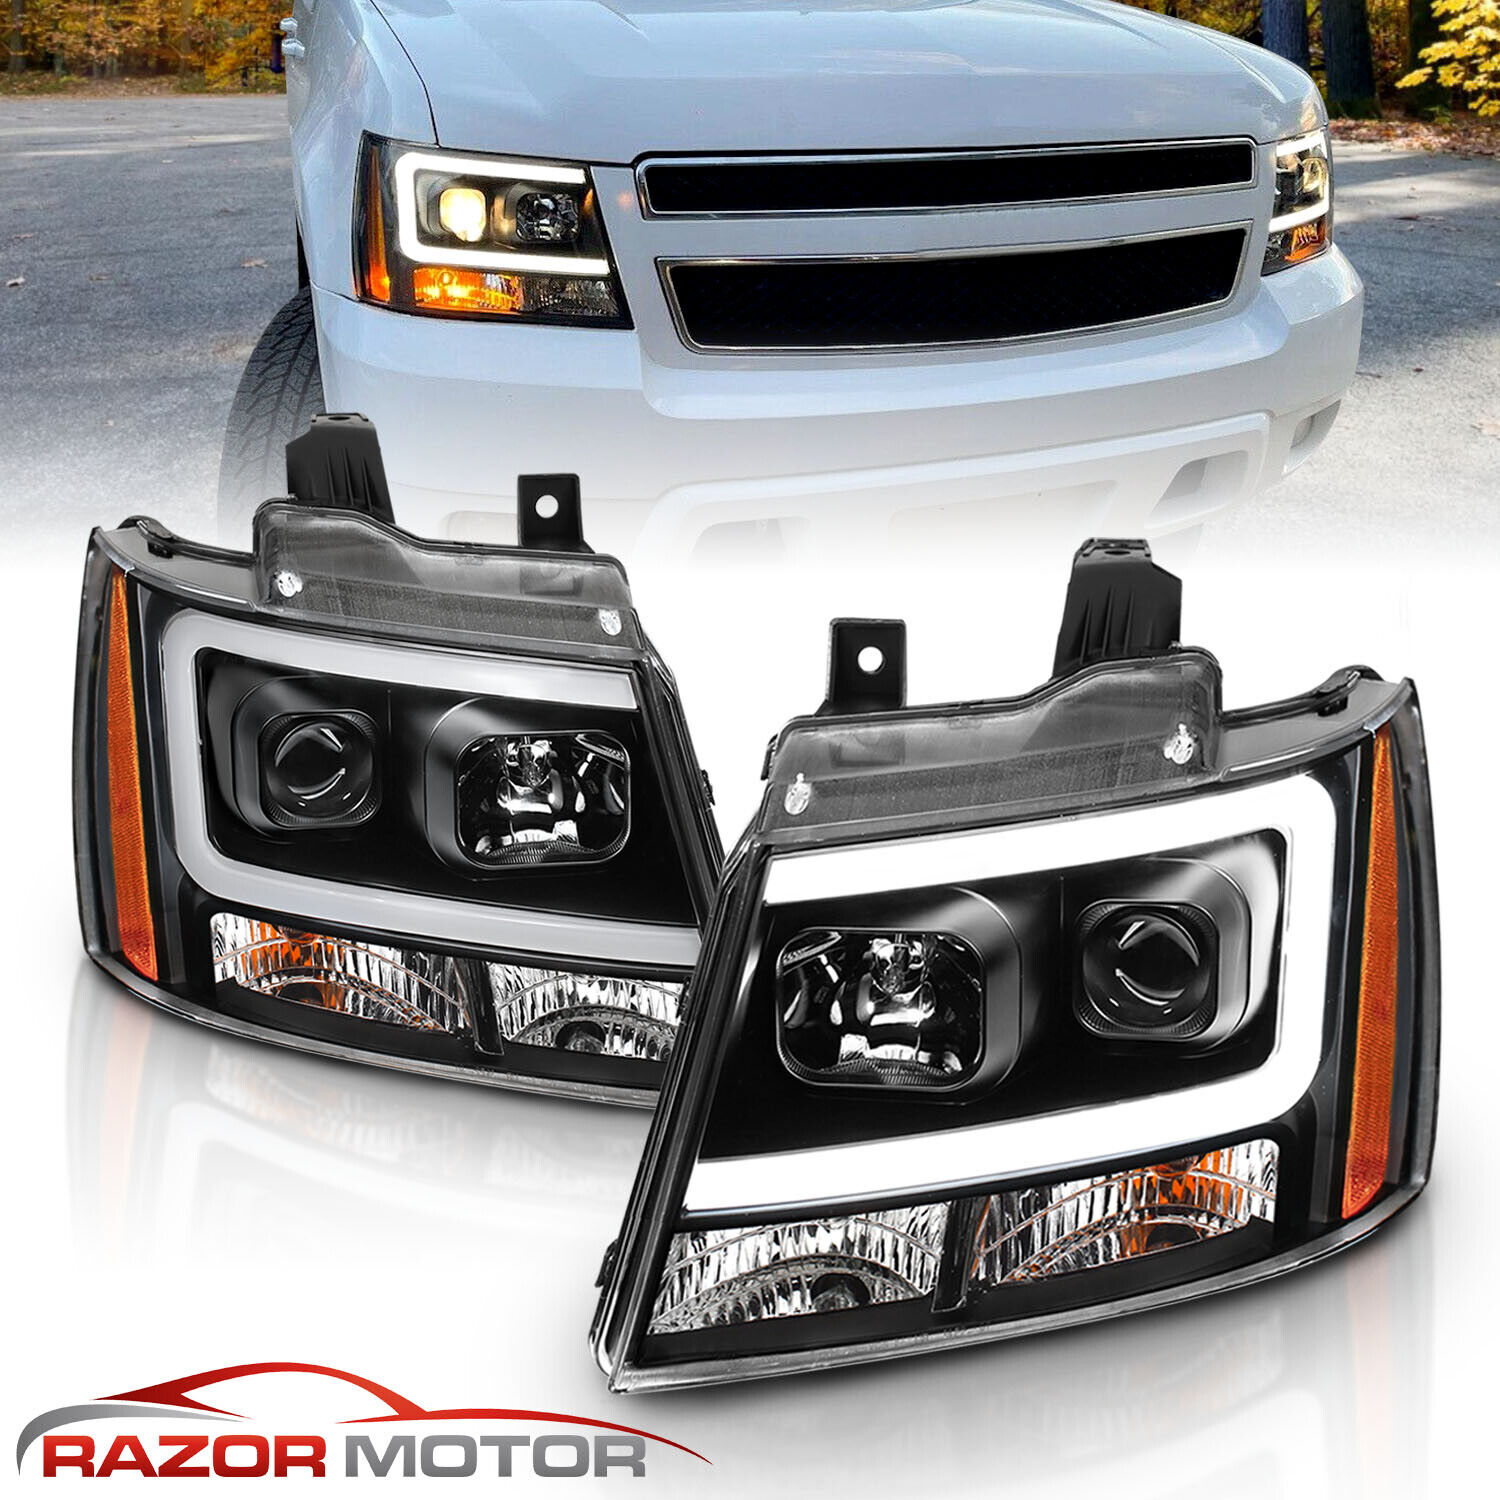 Black LED Tube DRL Headlights Pair For 2007-2014 Chevy Suburban/Tahoe/Avalanche